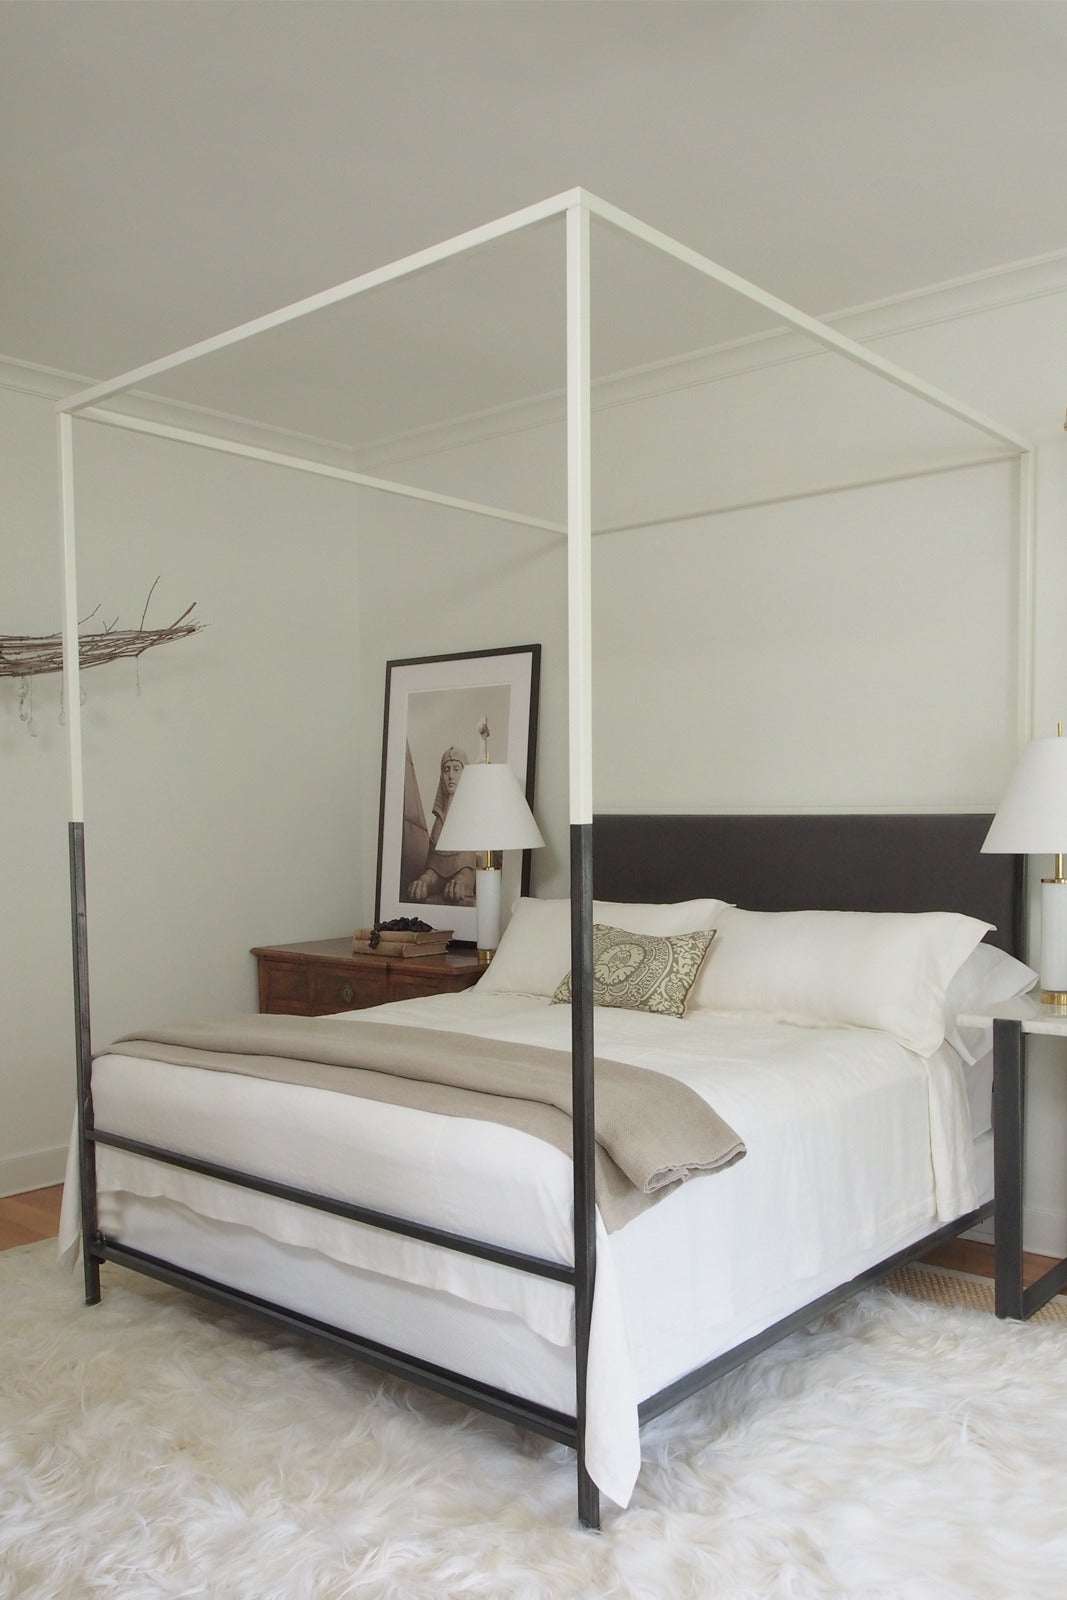 Twin size. This ultra-sleek and streamlined two-tone iron canopy bed with upholstered headboard from the custom Tara Shaw Maison collection has been featured in several shelter magazines, including veranda and architectural digest. Handcrafted in